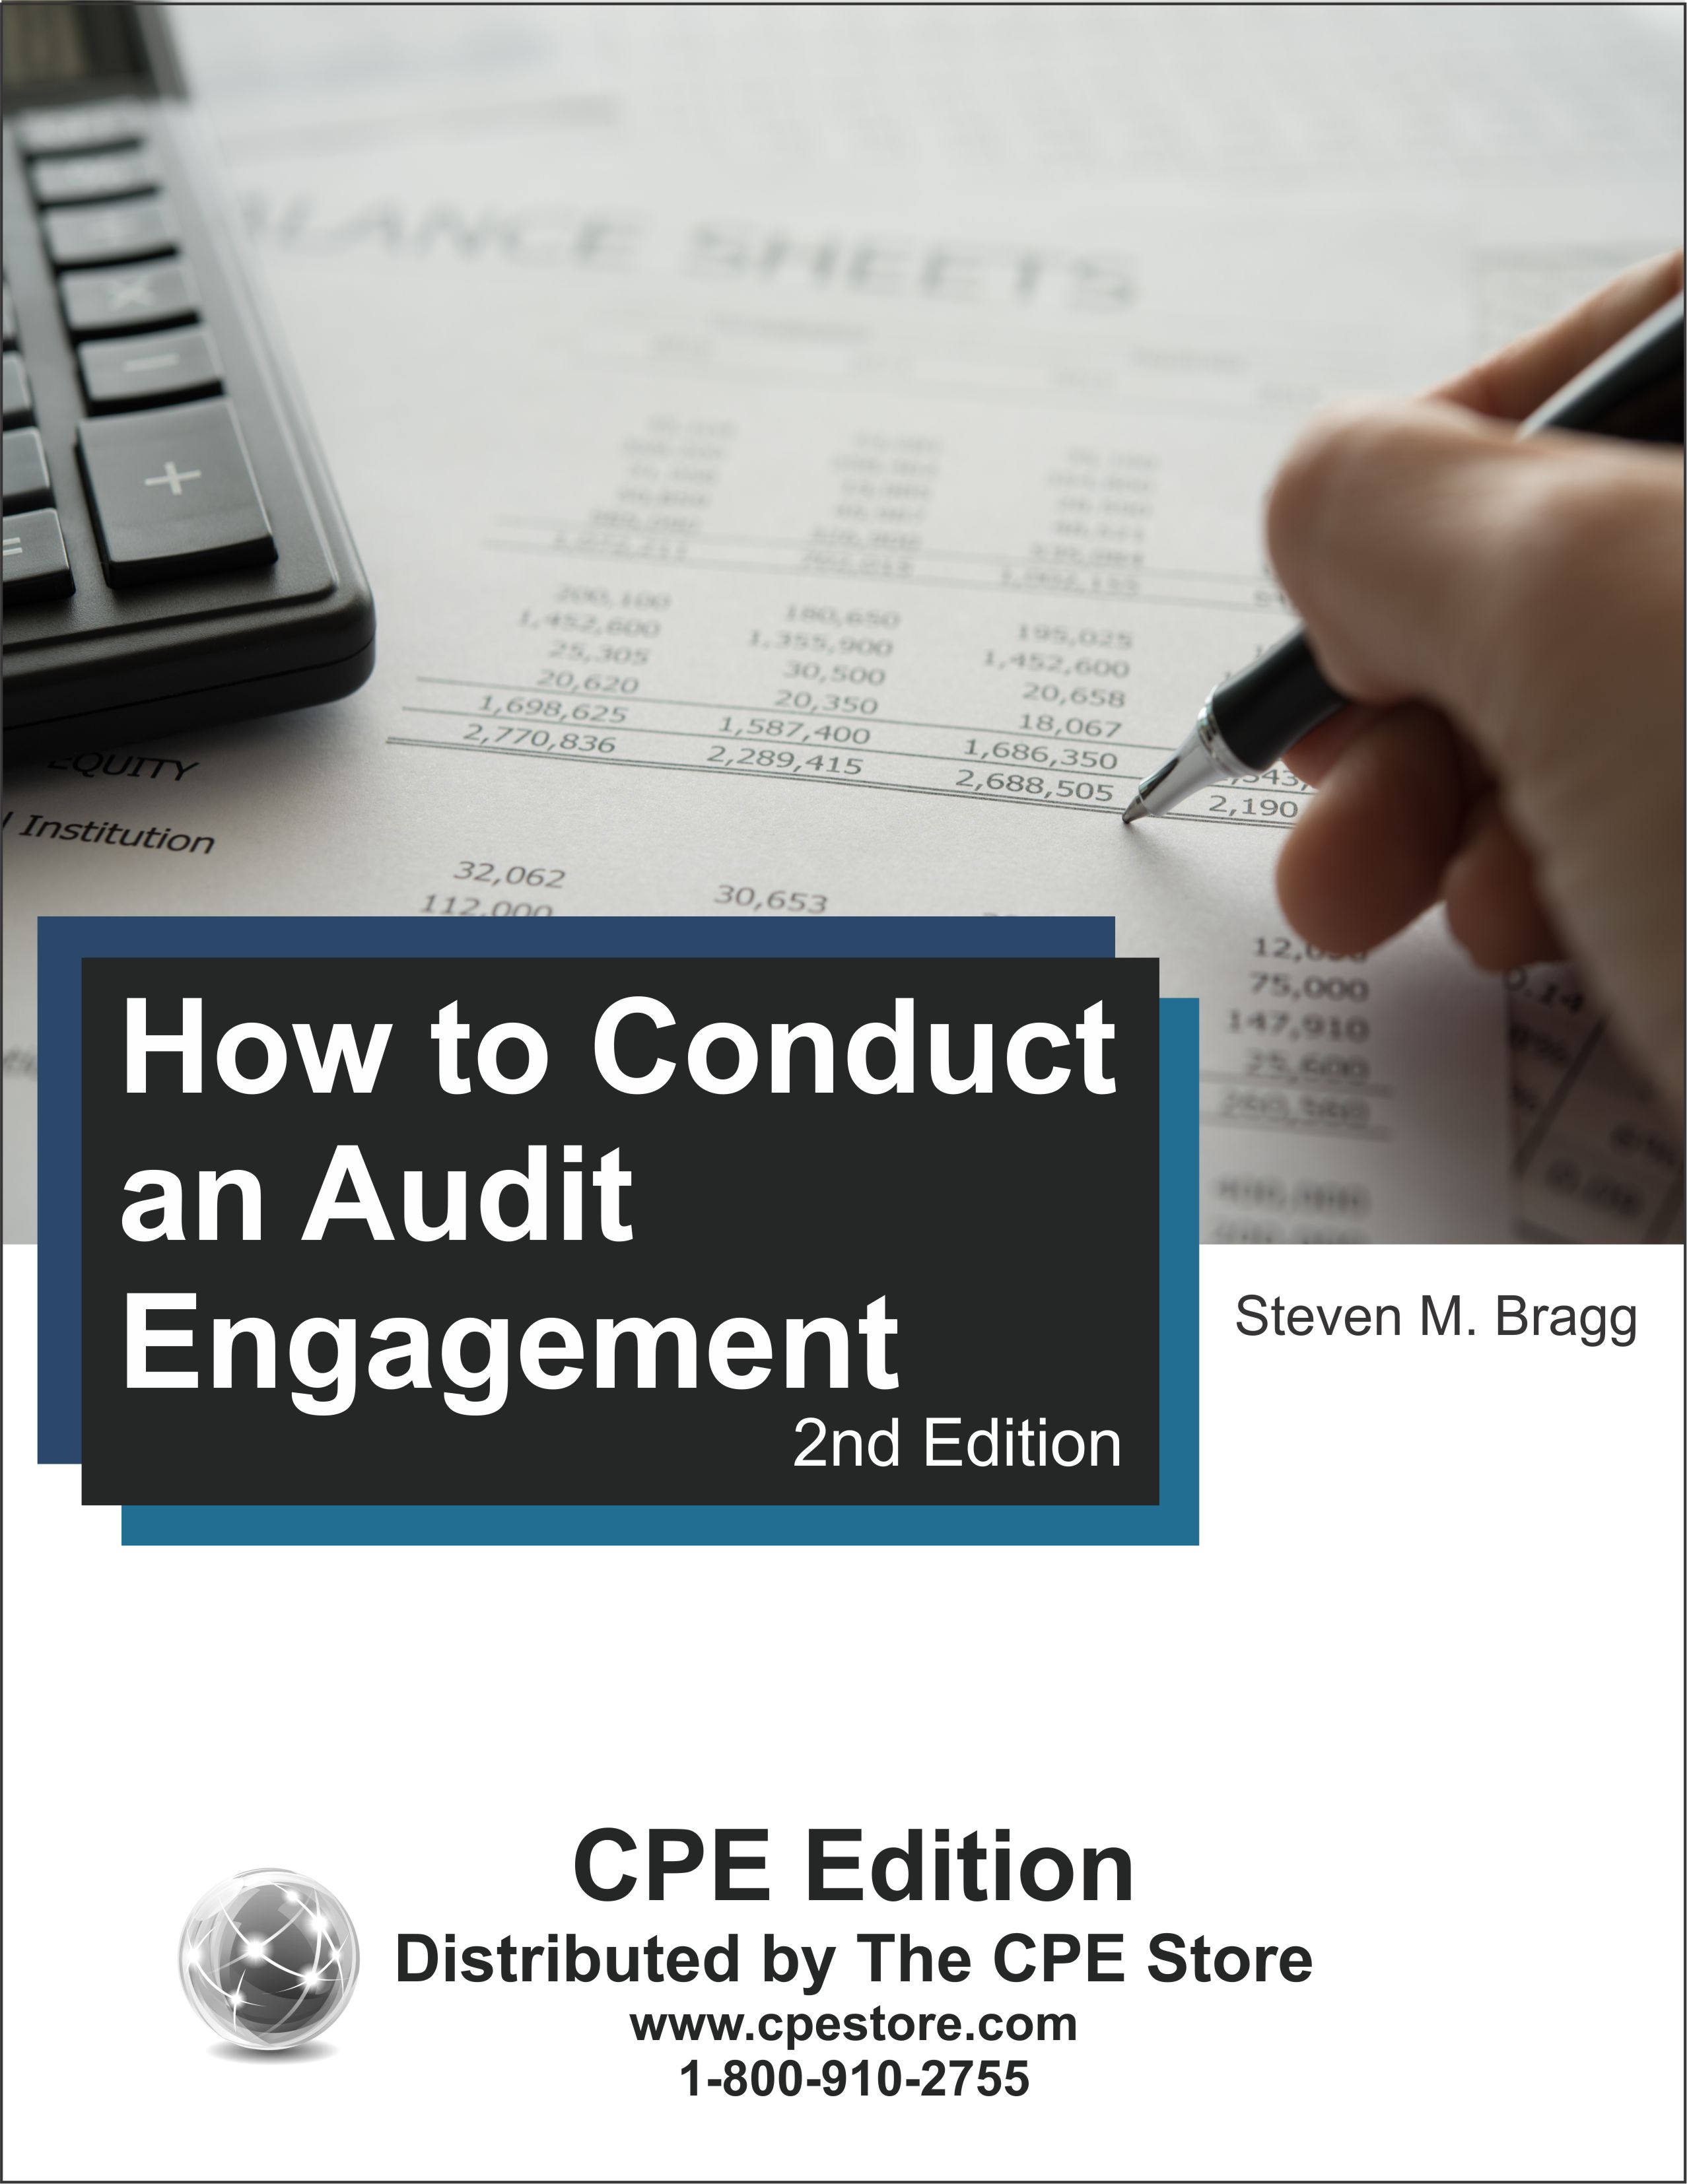 How to Conduct an Audit Engagement